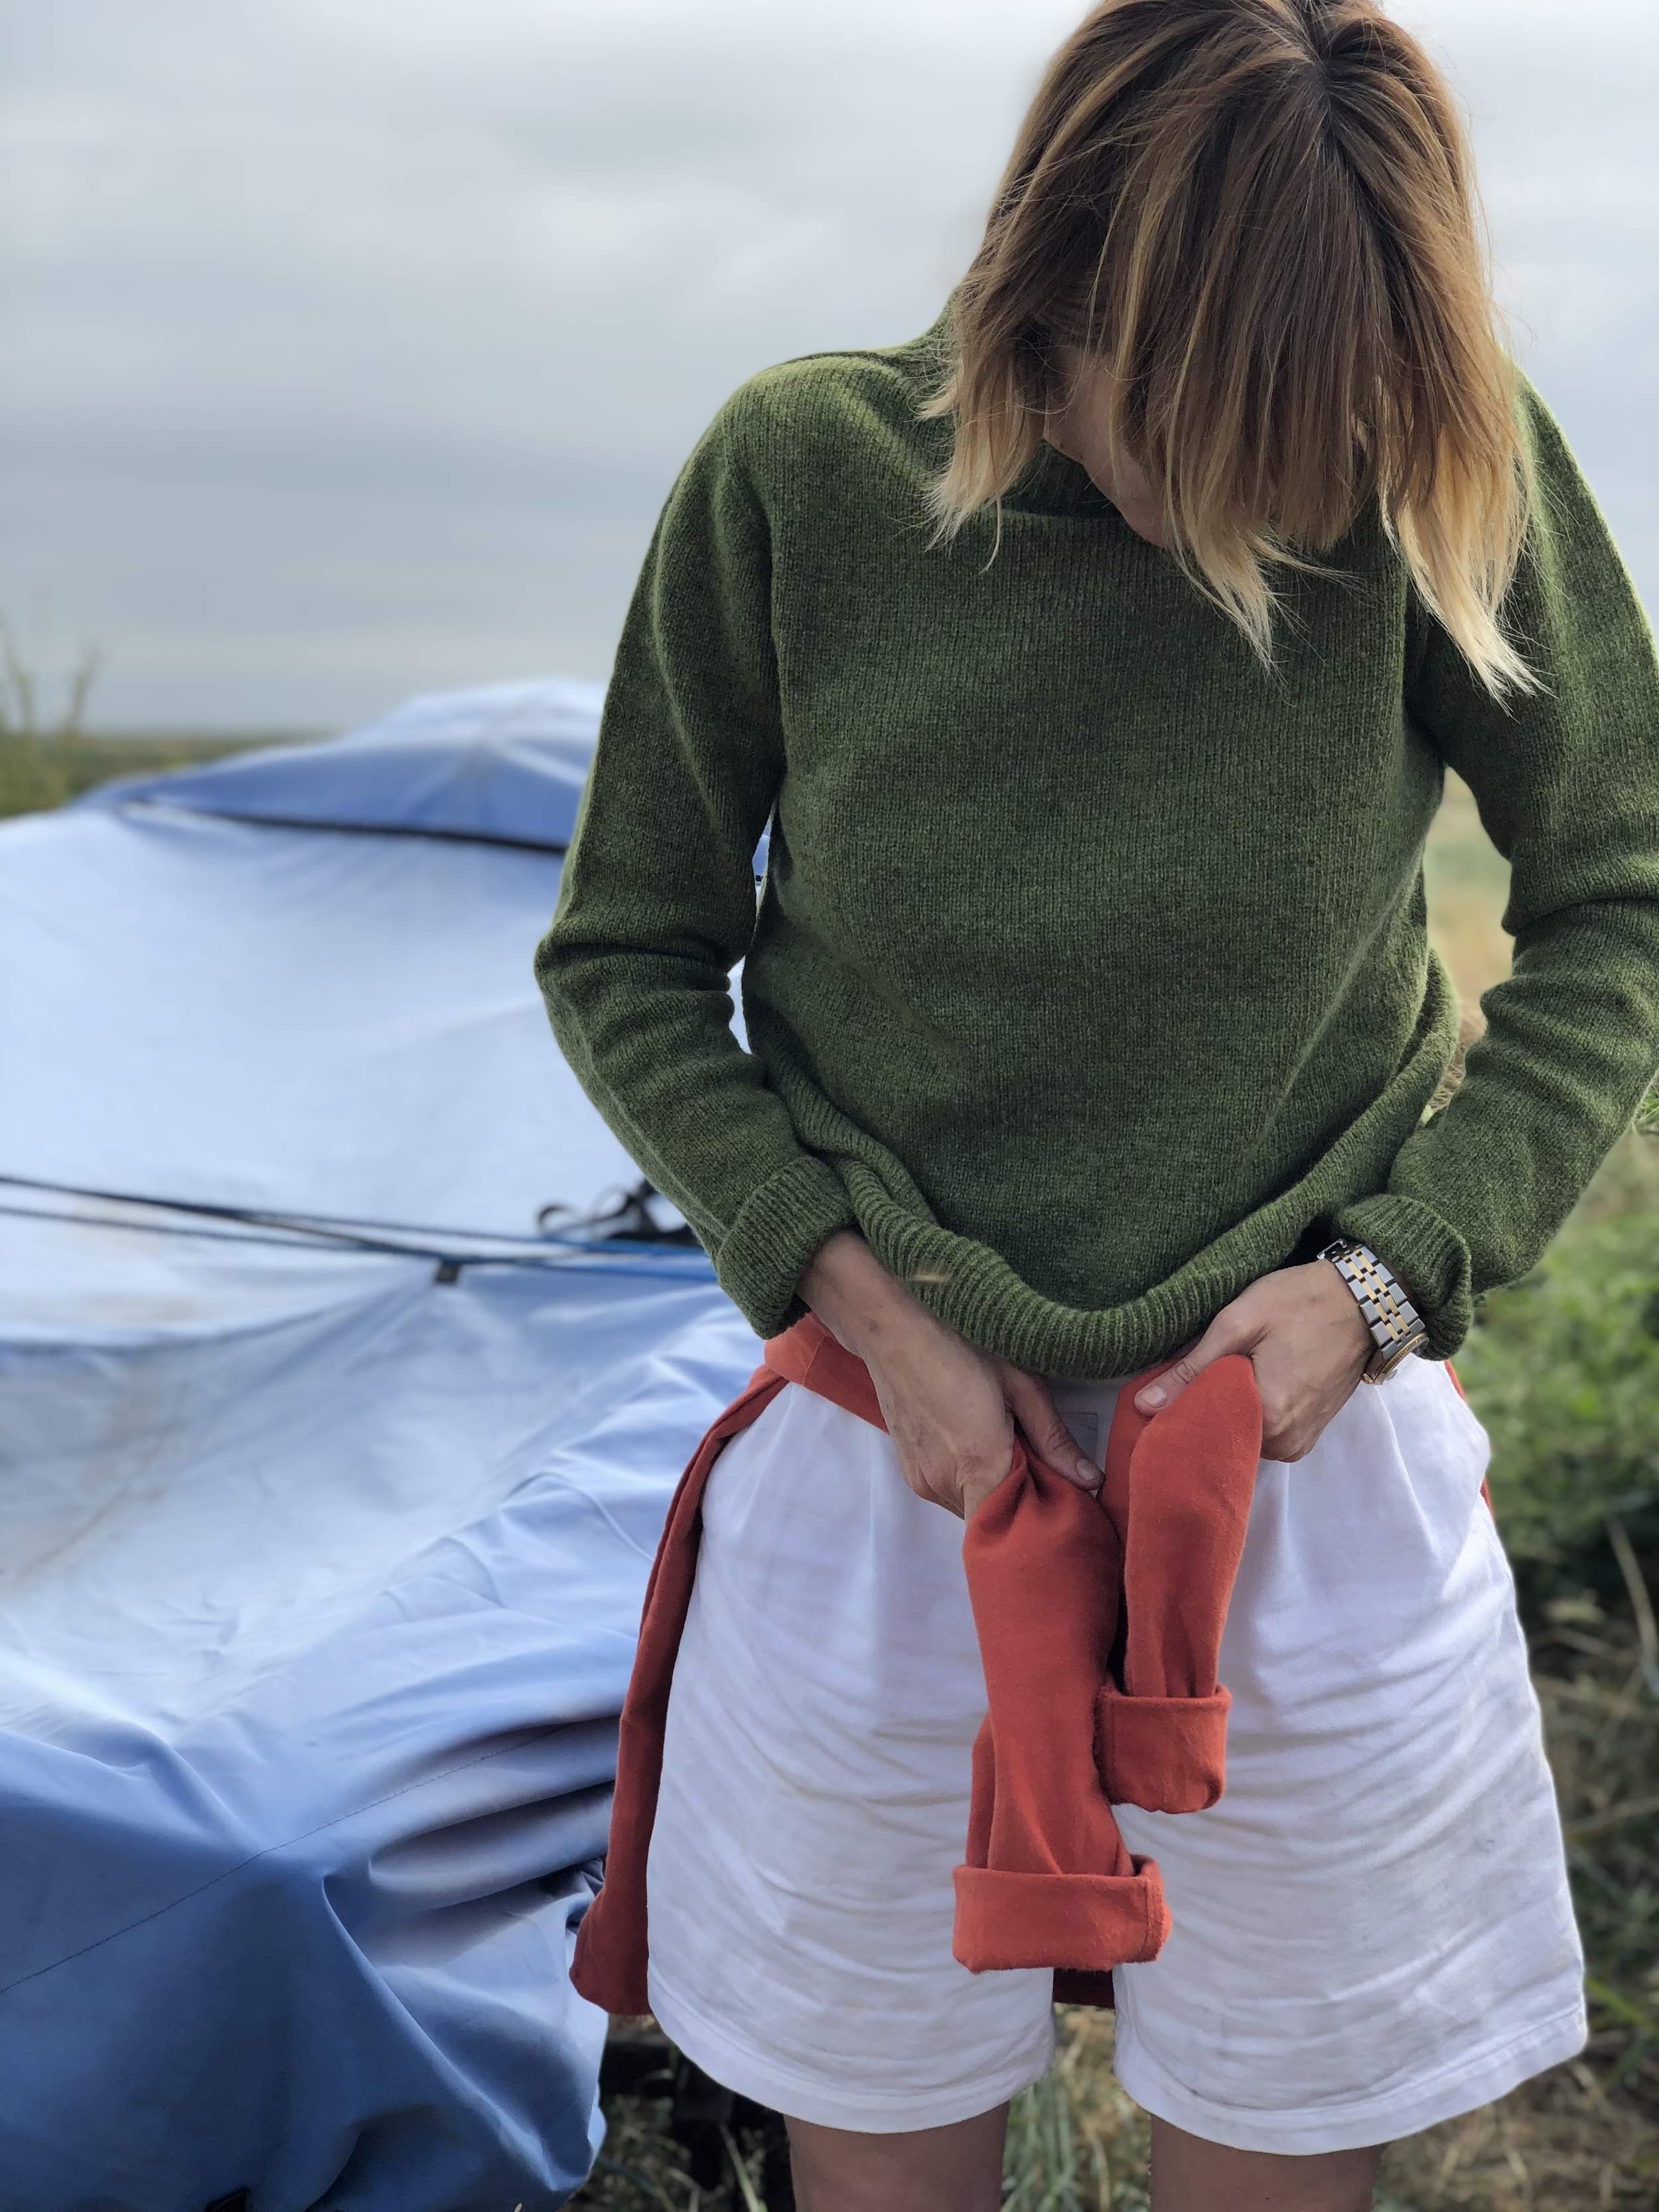 Woman wears Carrier Company Ladies Shorts in White and Shetland Lambswool Jumper